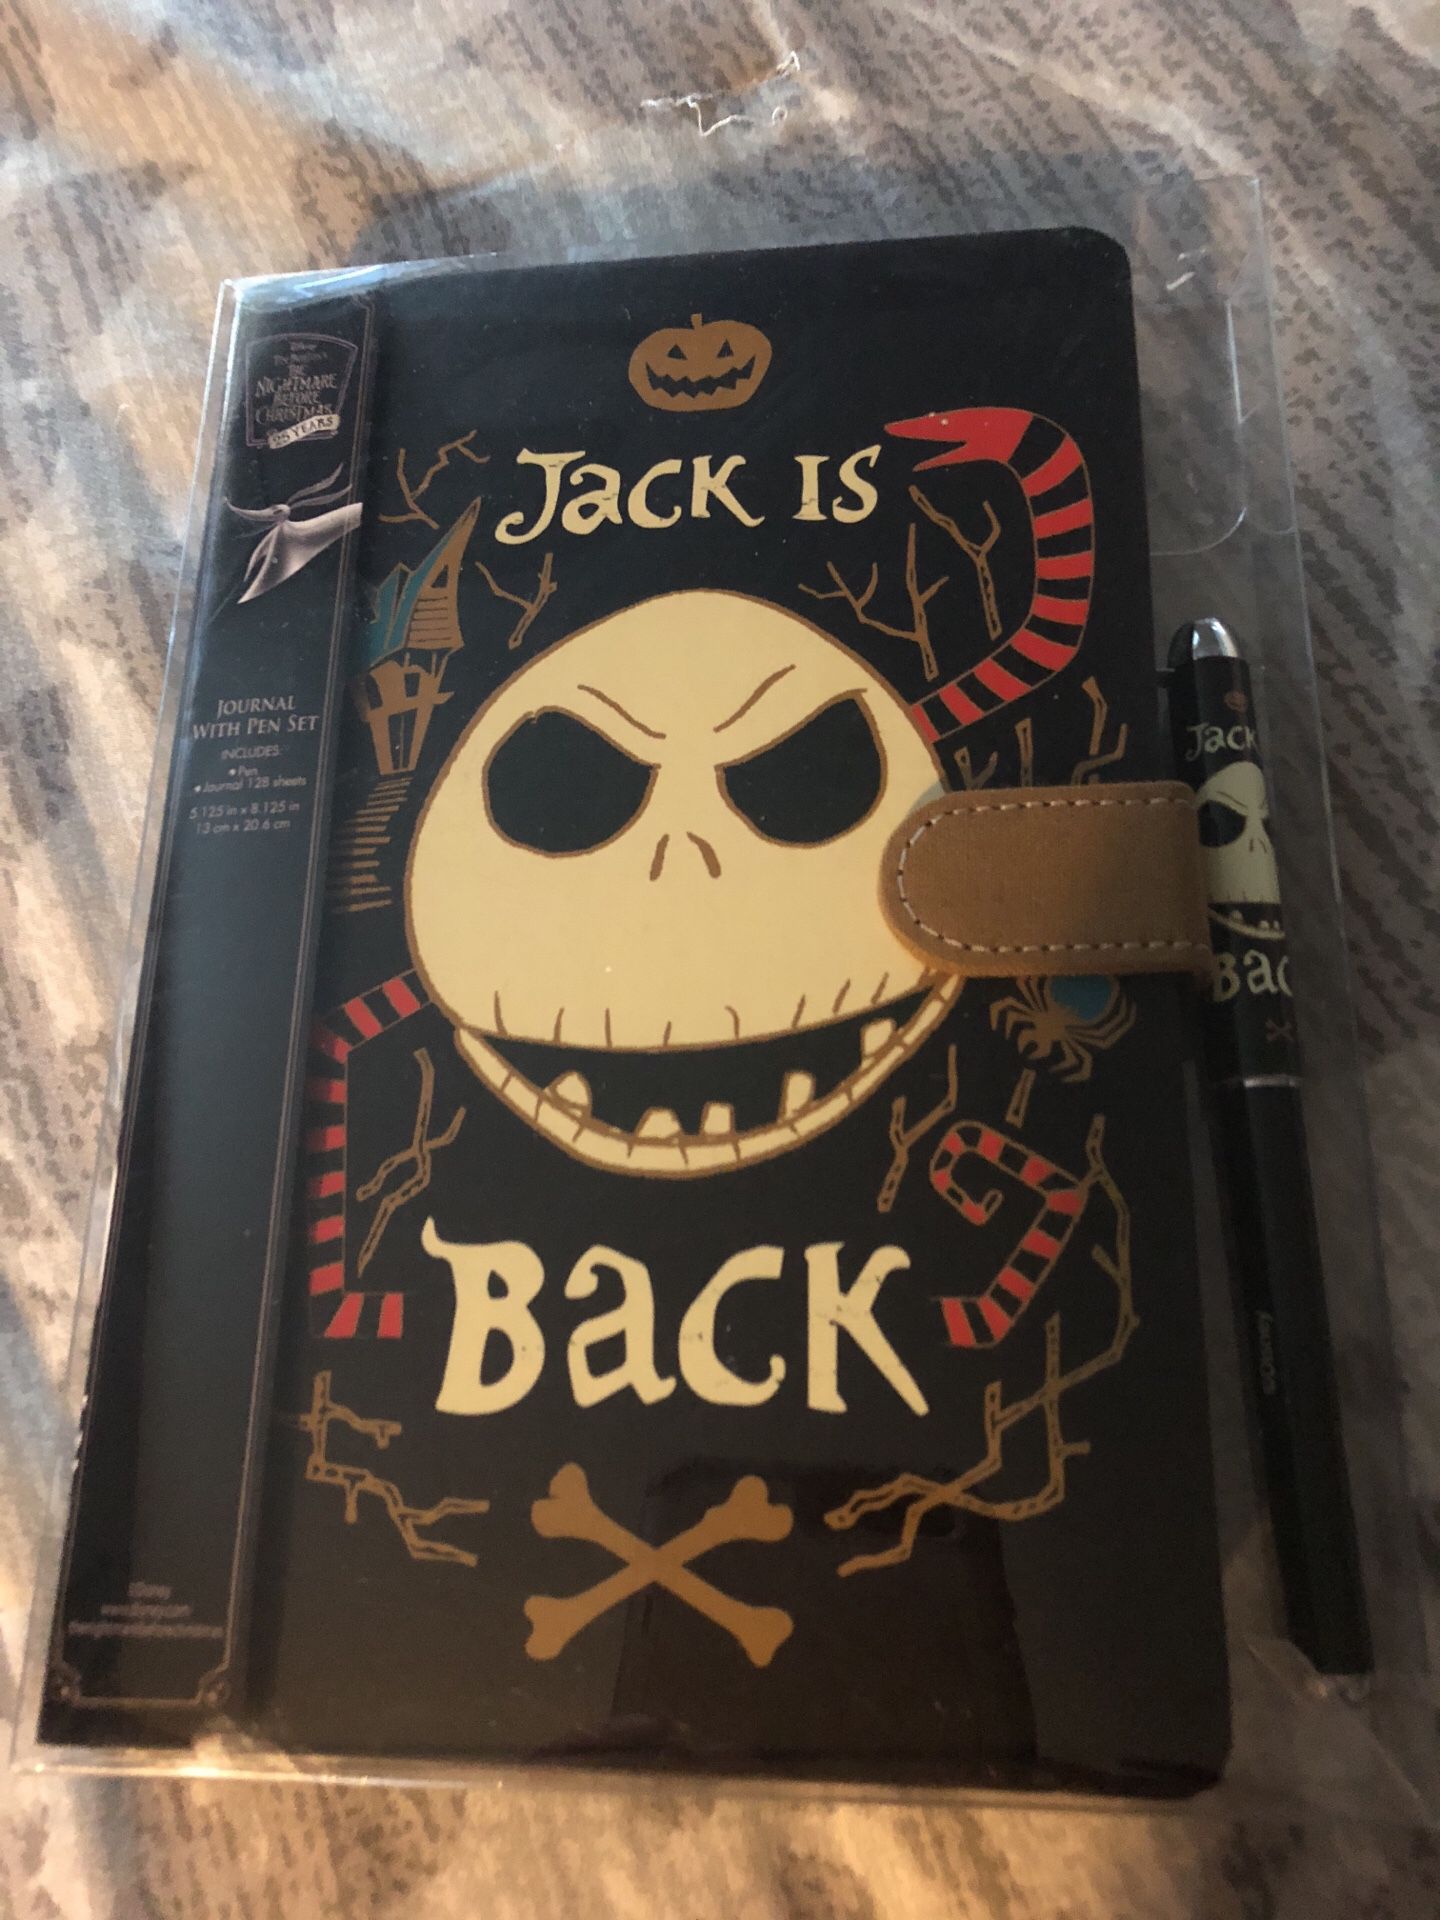 Nightmare Before Christmas 128 page Journal w/Pen